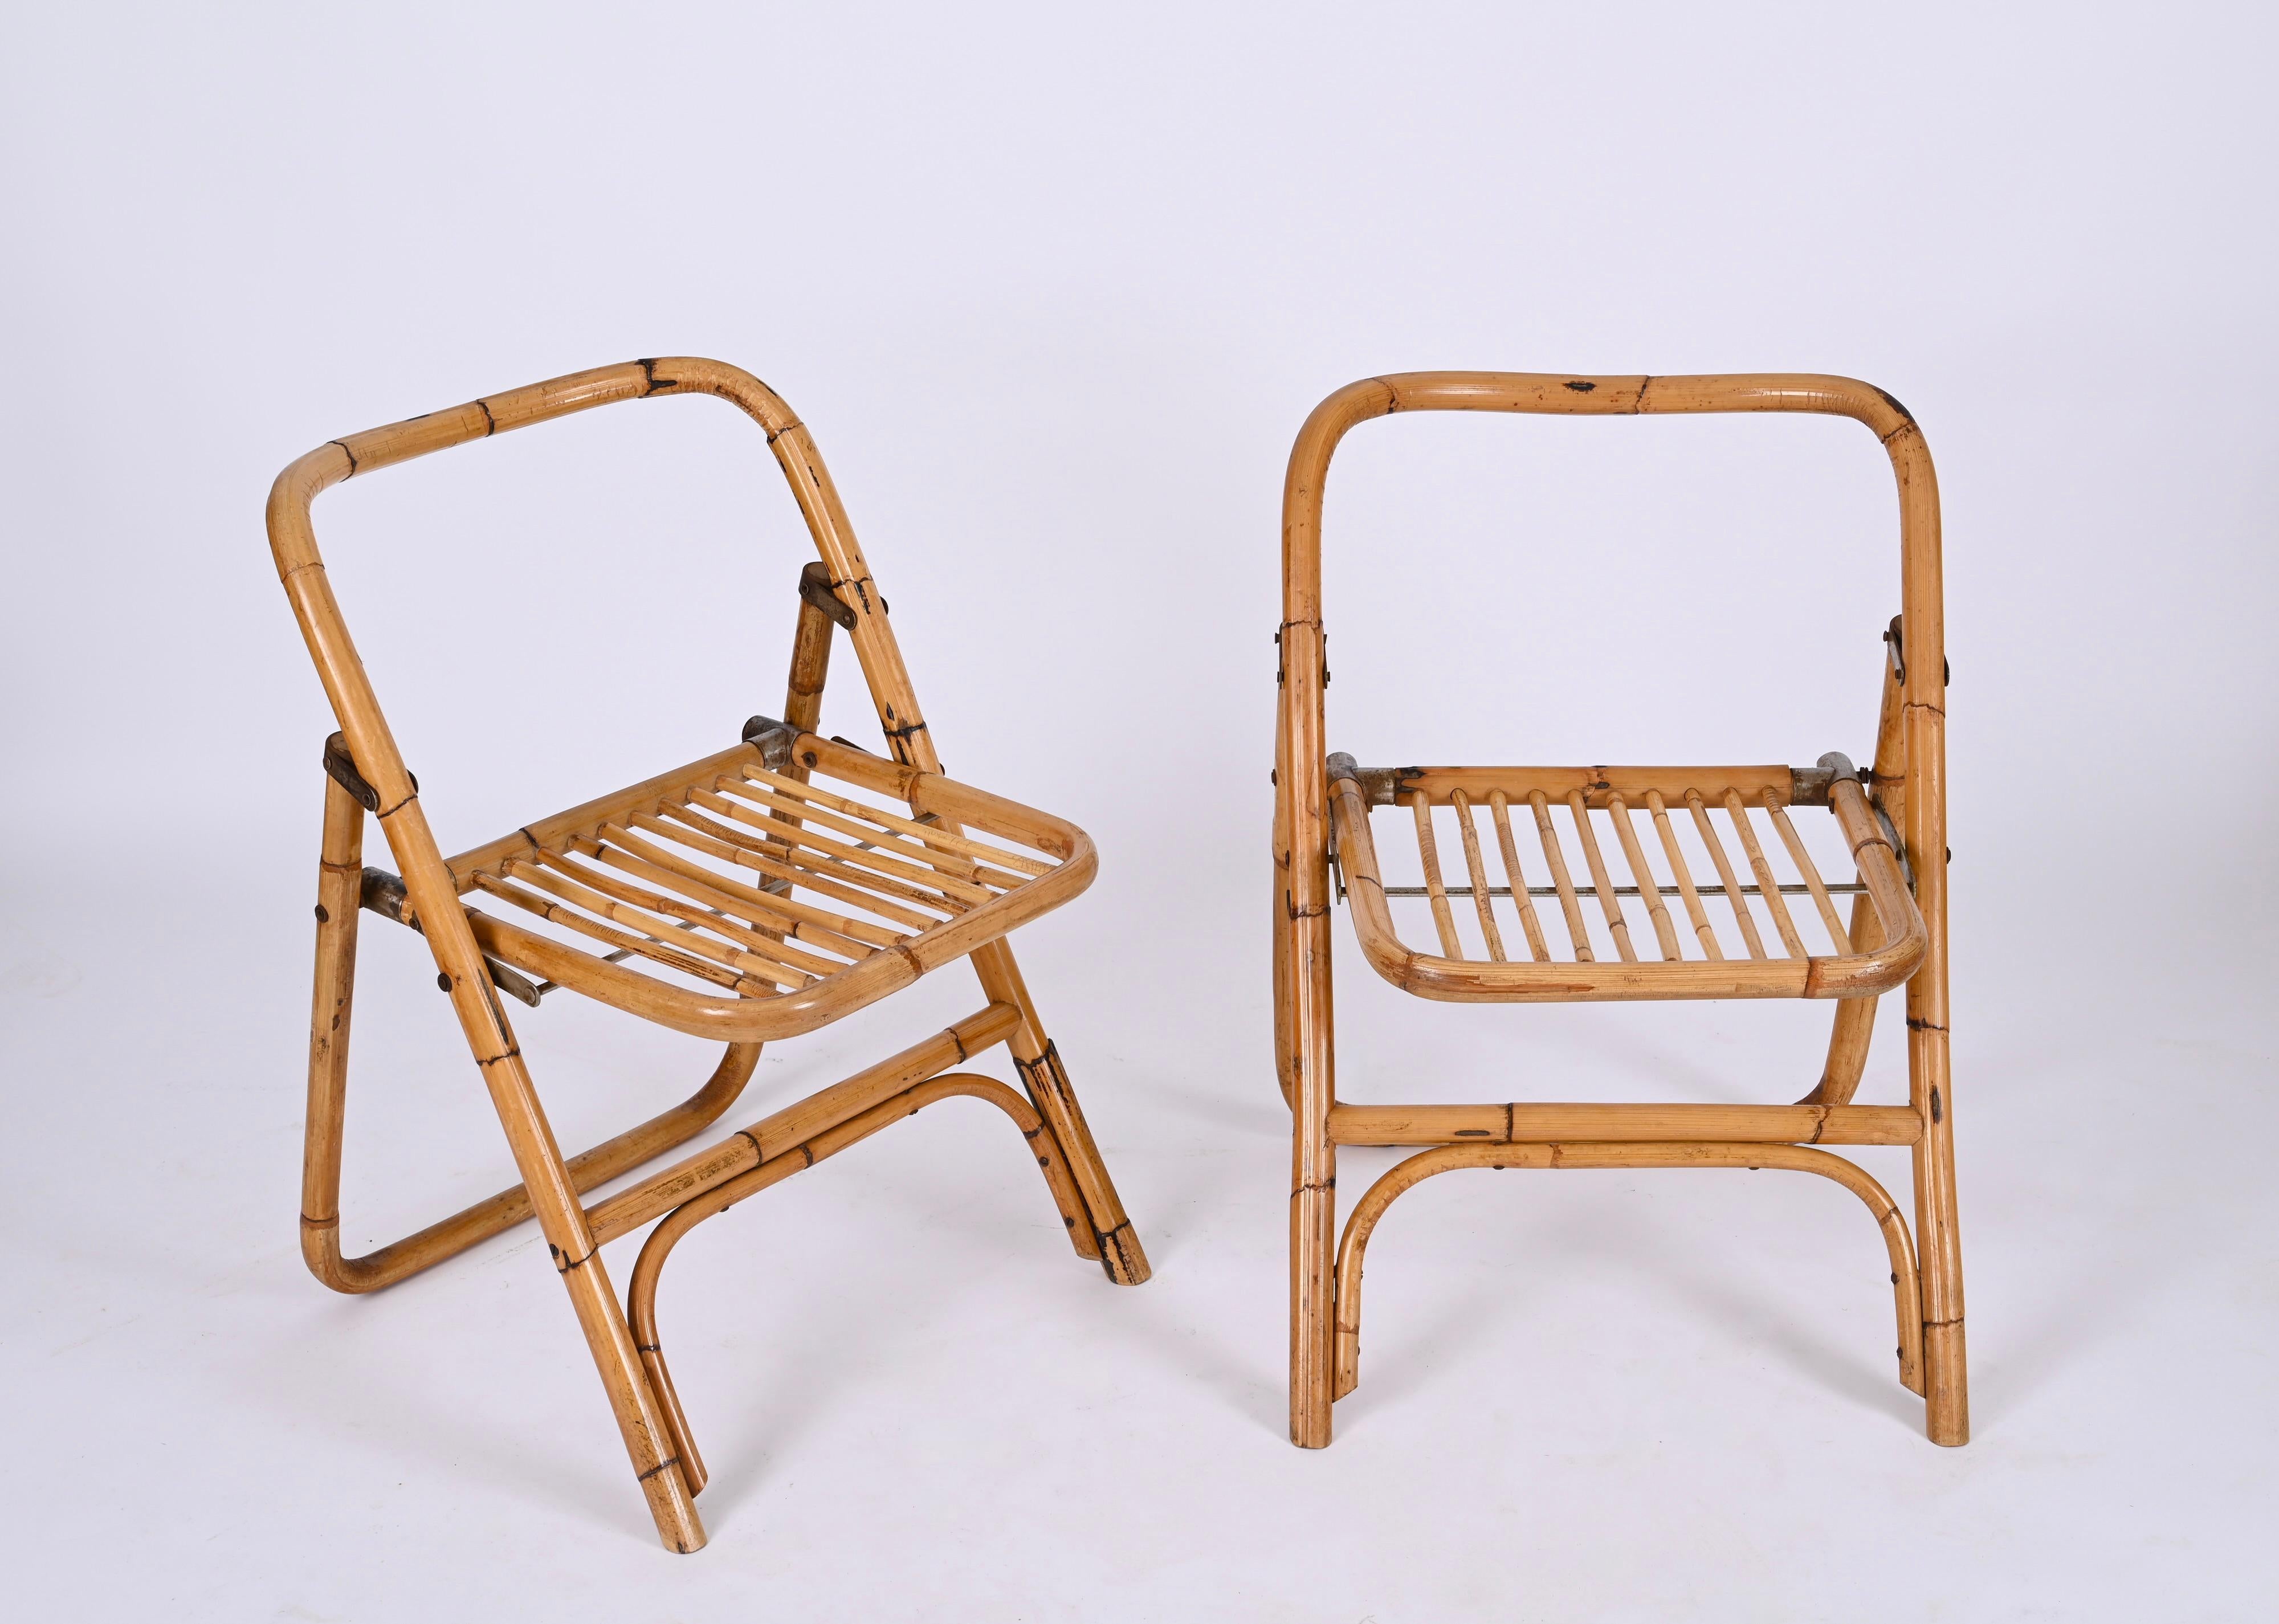 Metal Dal Vera Bamboo Folding Chairs, Italy, 1960s For Sale